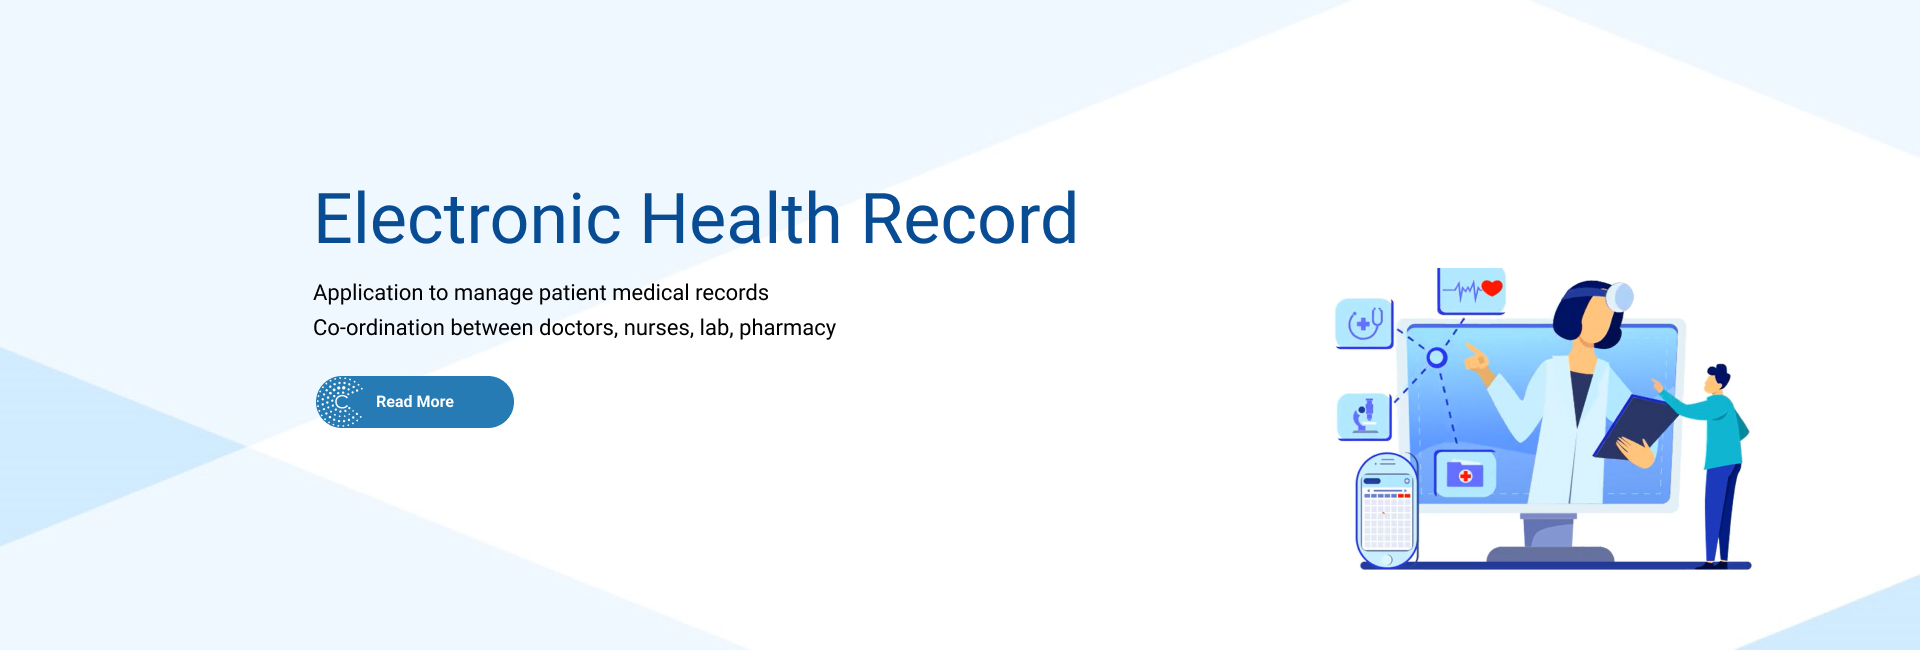 Electronic Health Record - Digital version of a patient's medical record, Including medical history, medications and reports.